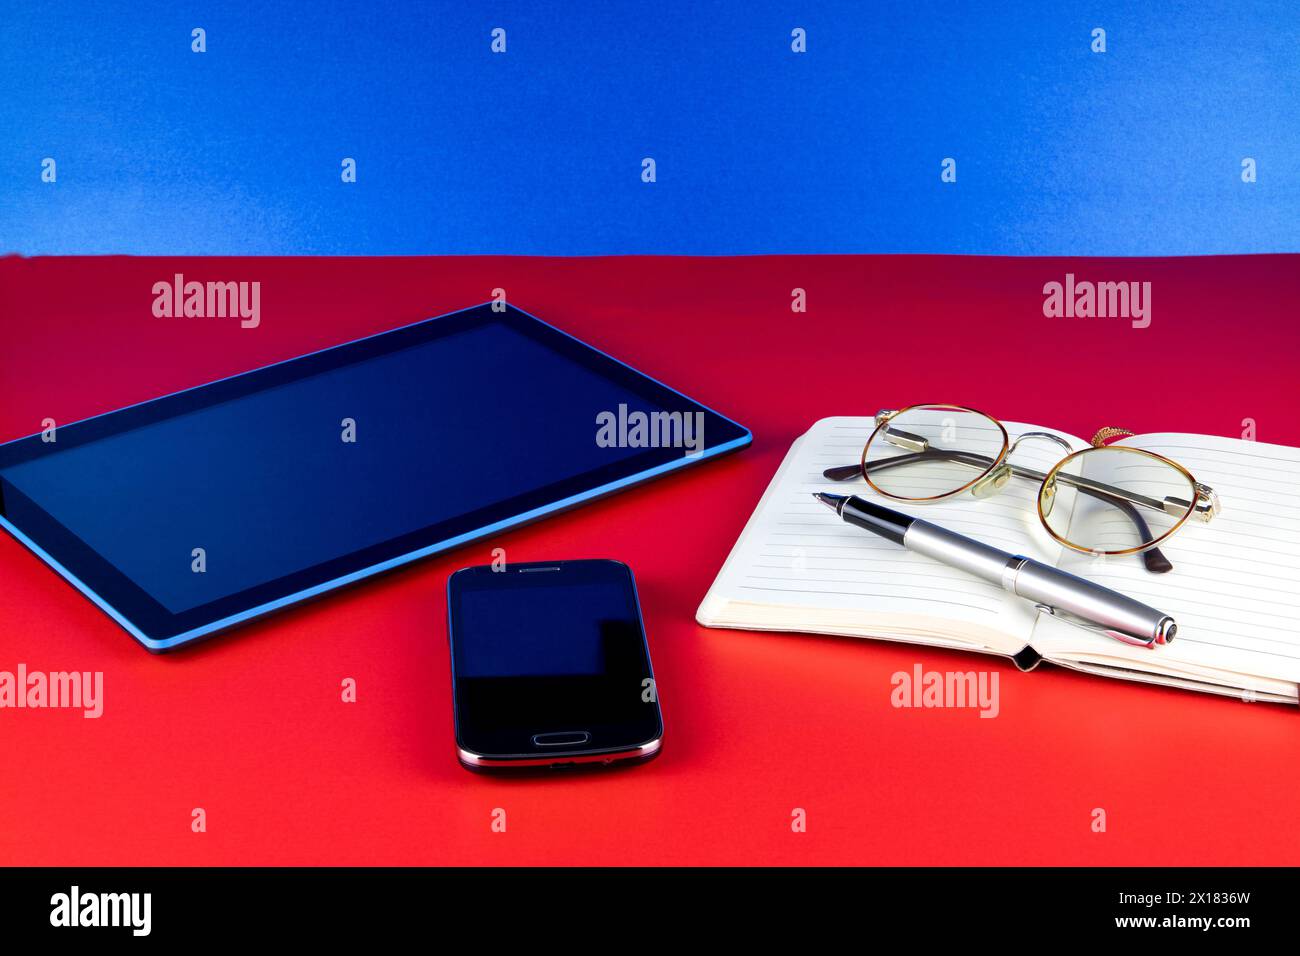 Mobile phone with tablet device and notebook pen and eye glasses on a red base and blue background Stock Photo